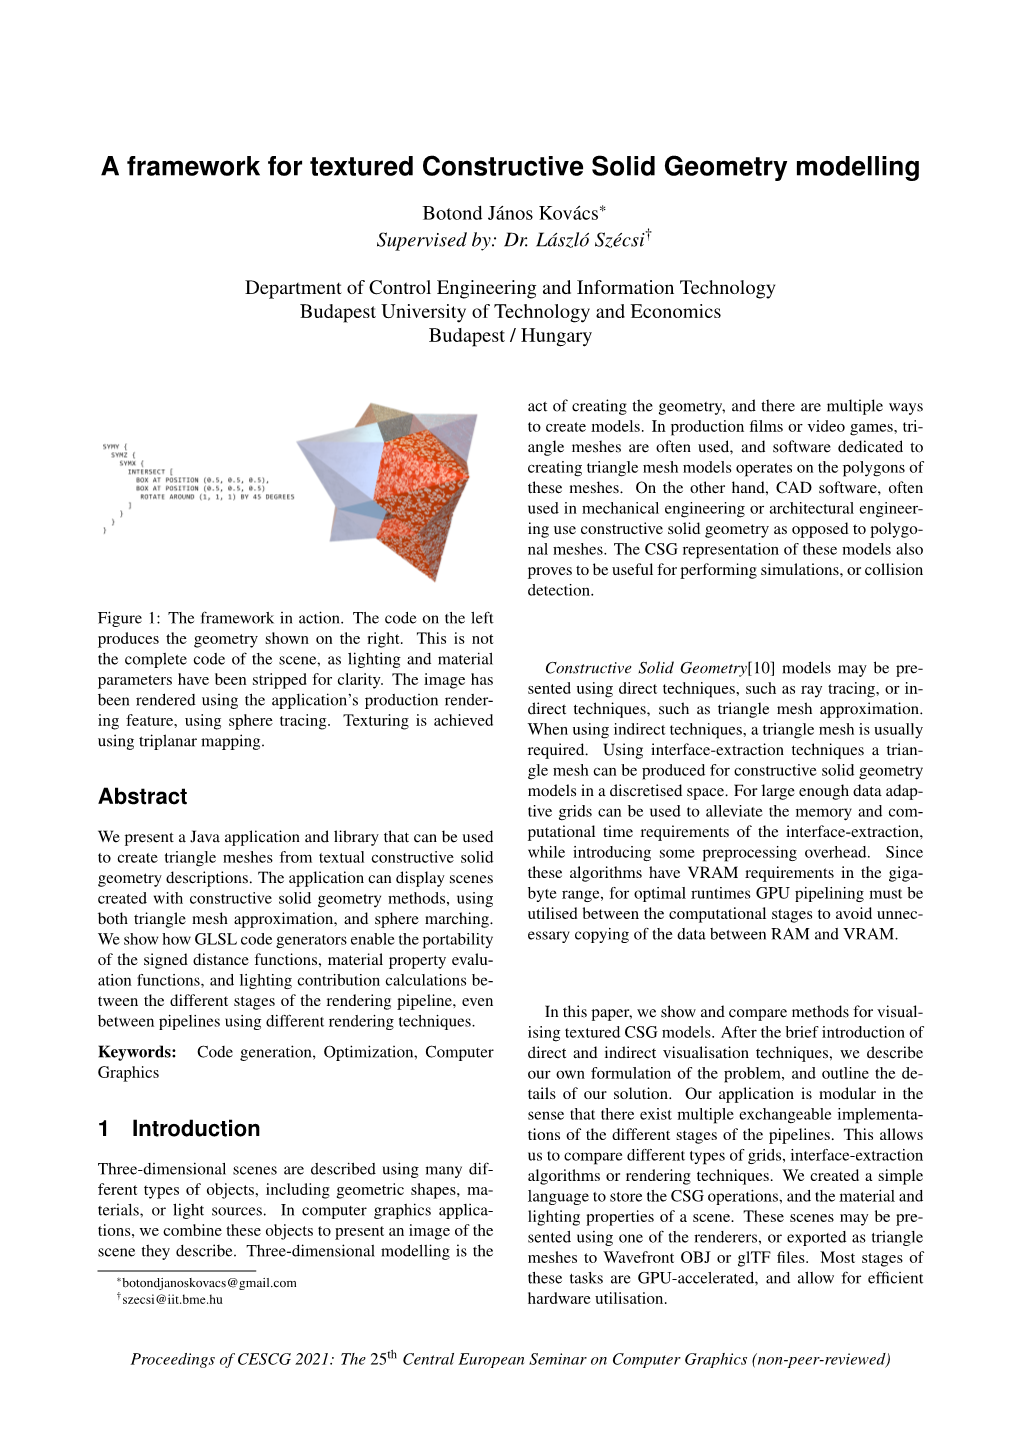 A Framework for Textured Constructive Solid Geometry Modelling